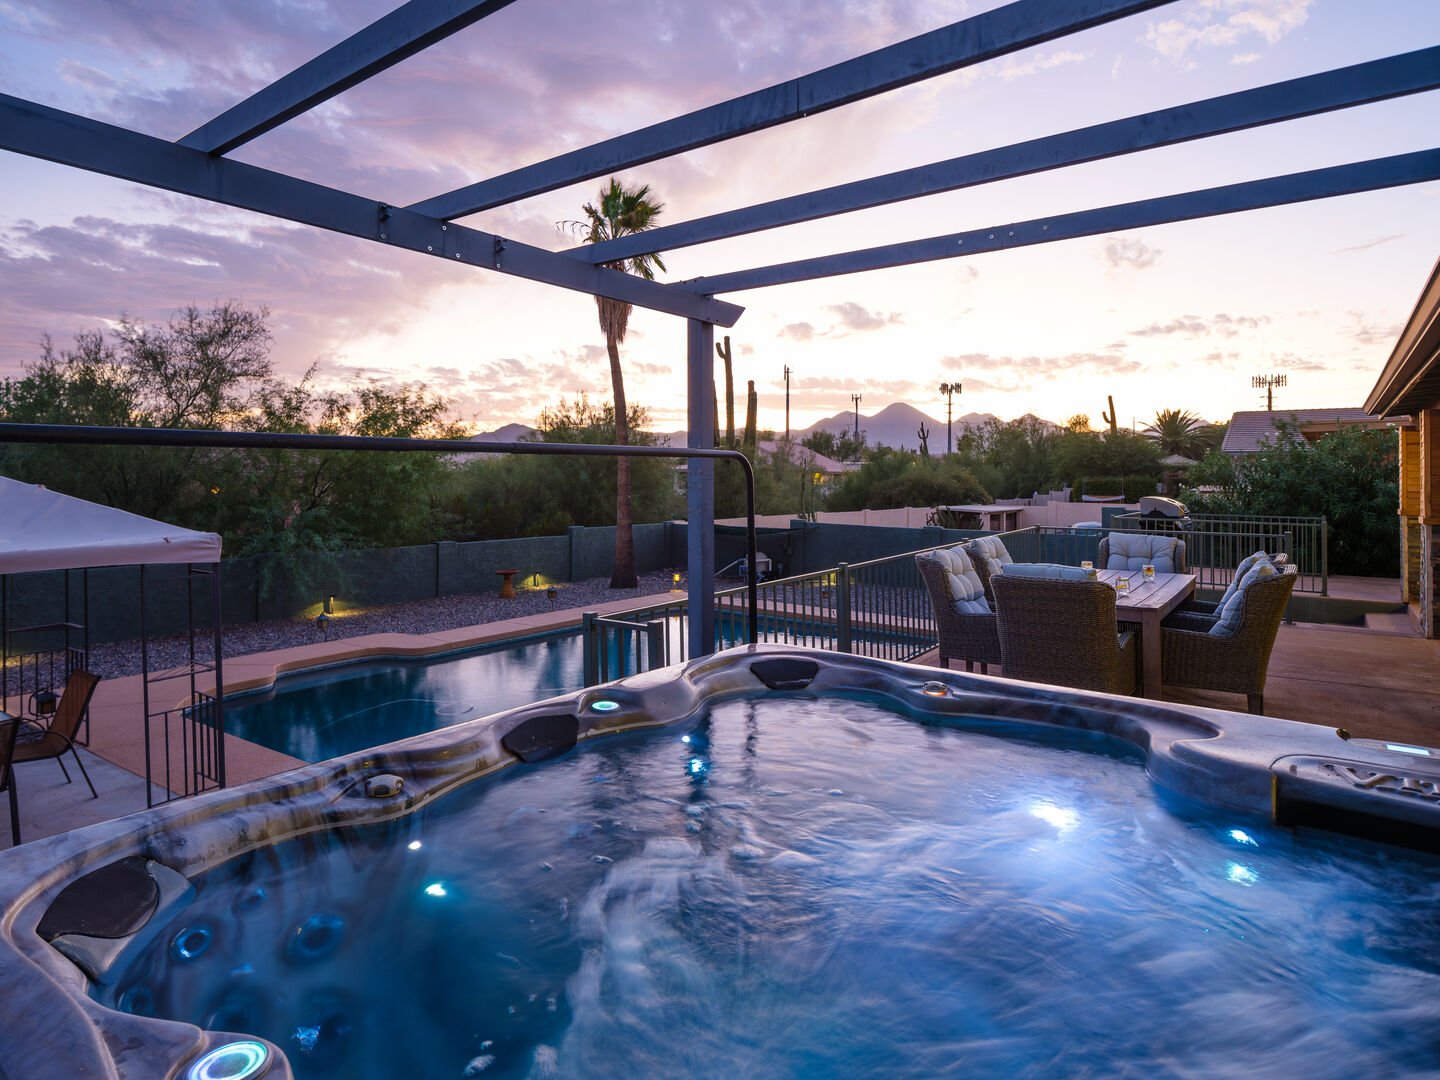 Beautiful valley sunset in the comfort of your own backyard. Relax with some wine on a cool evening in the jacuzzi!